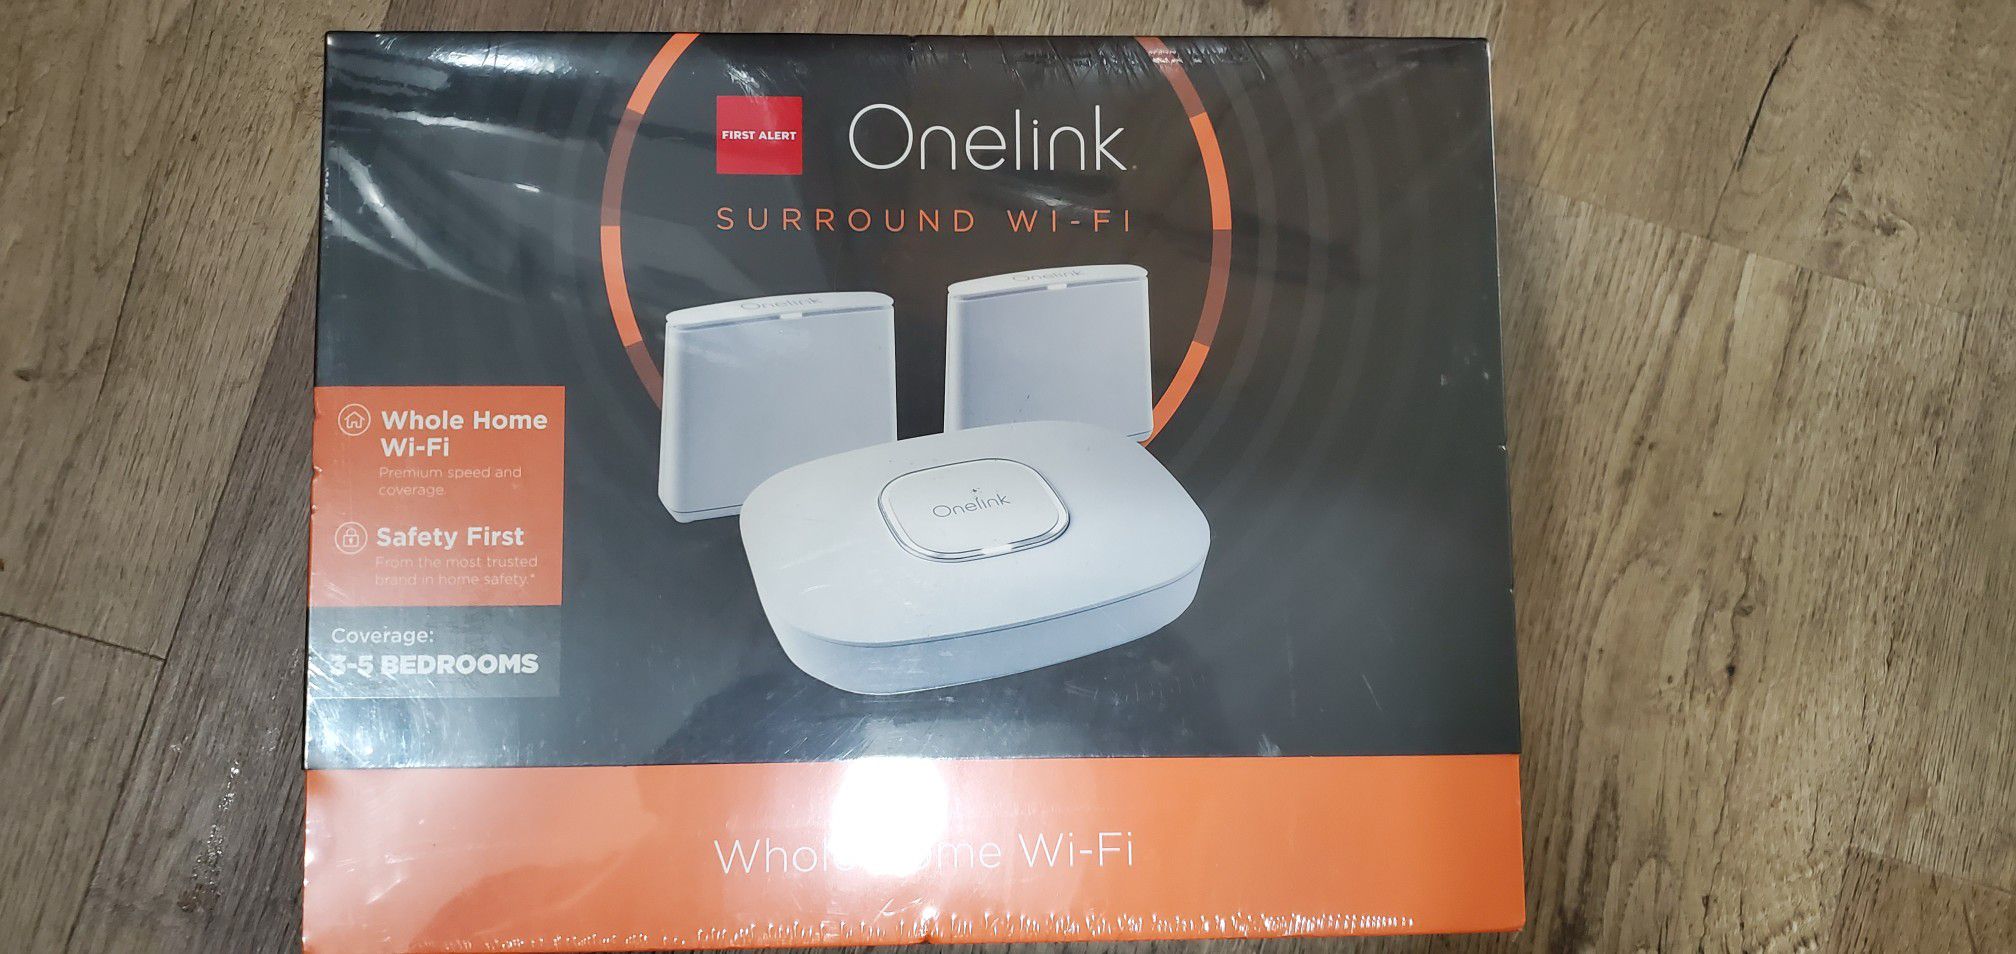 Brand new one link surround wifi mesh router